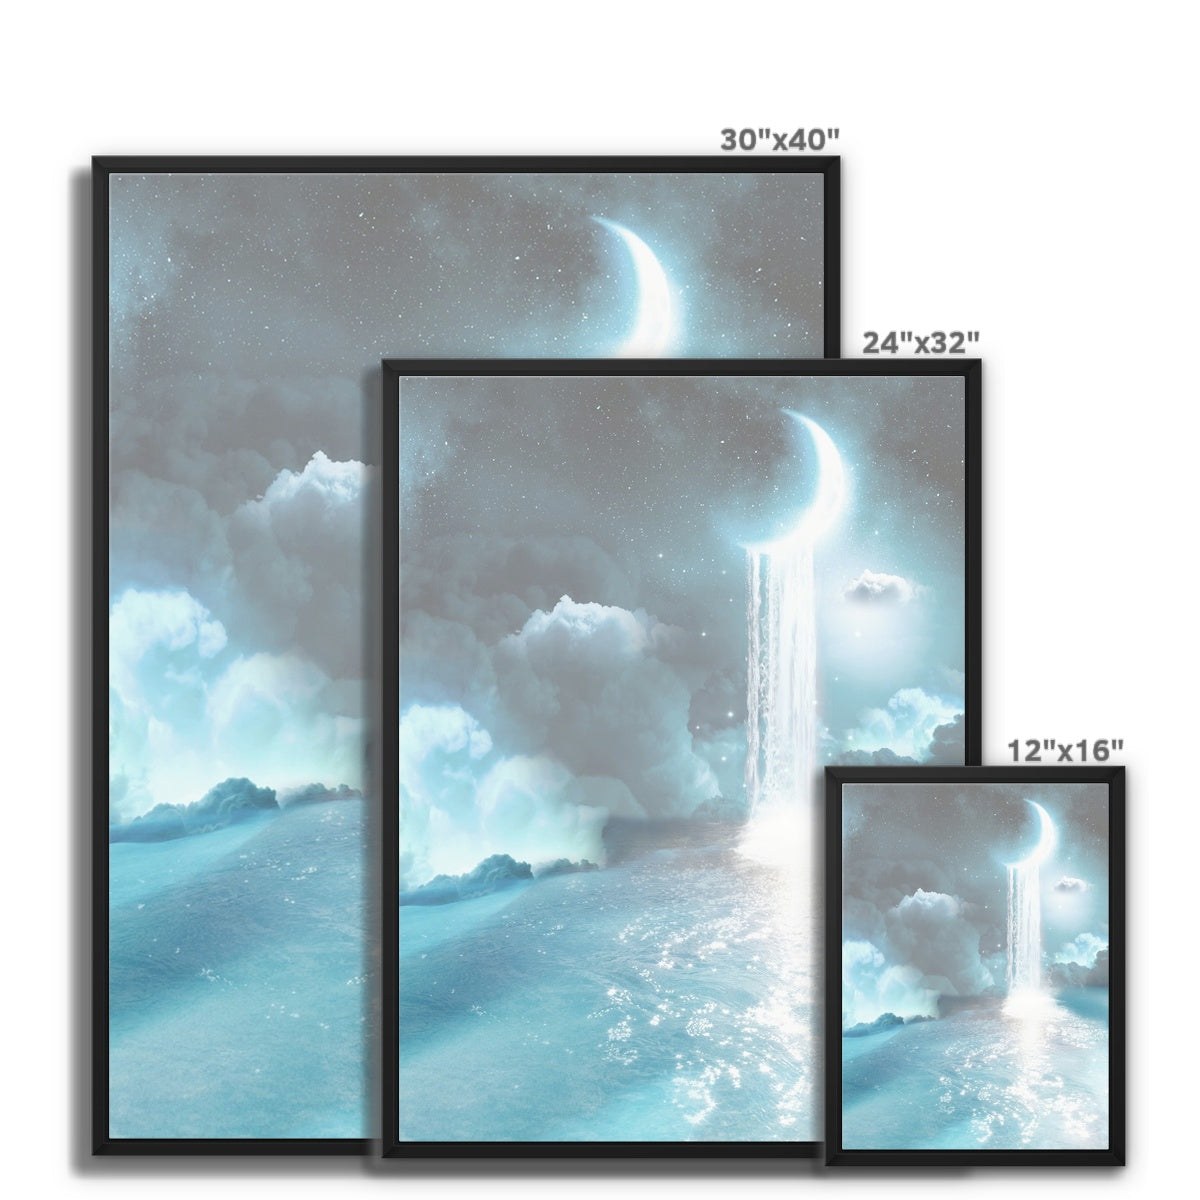 Lunar Waters Framed Canvas - Starseed Designs Inc.